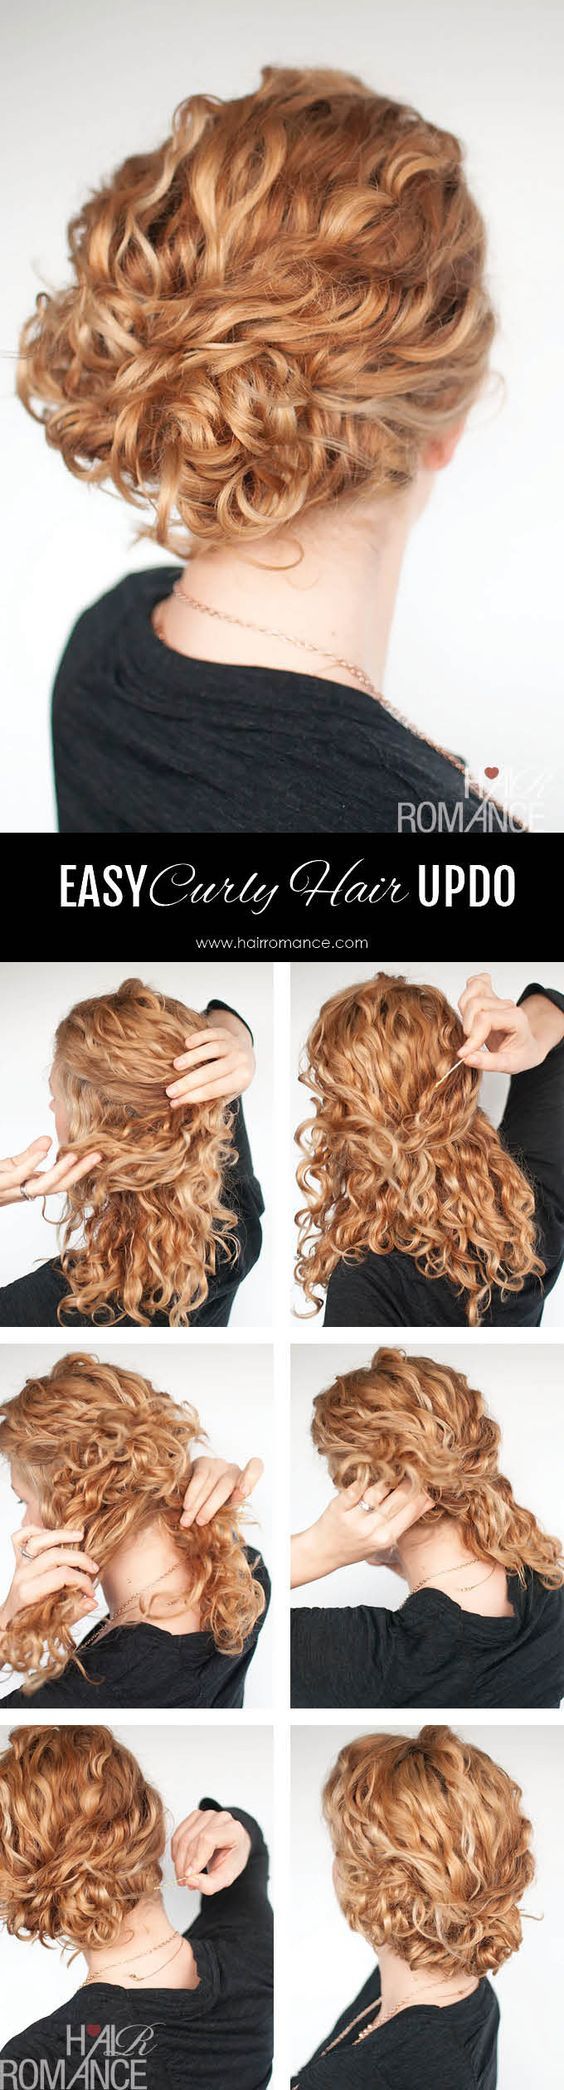 Curly Hair Tutorial – easy curly updo